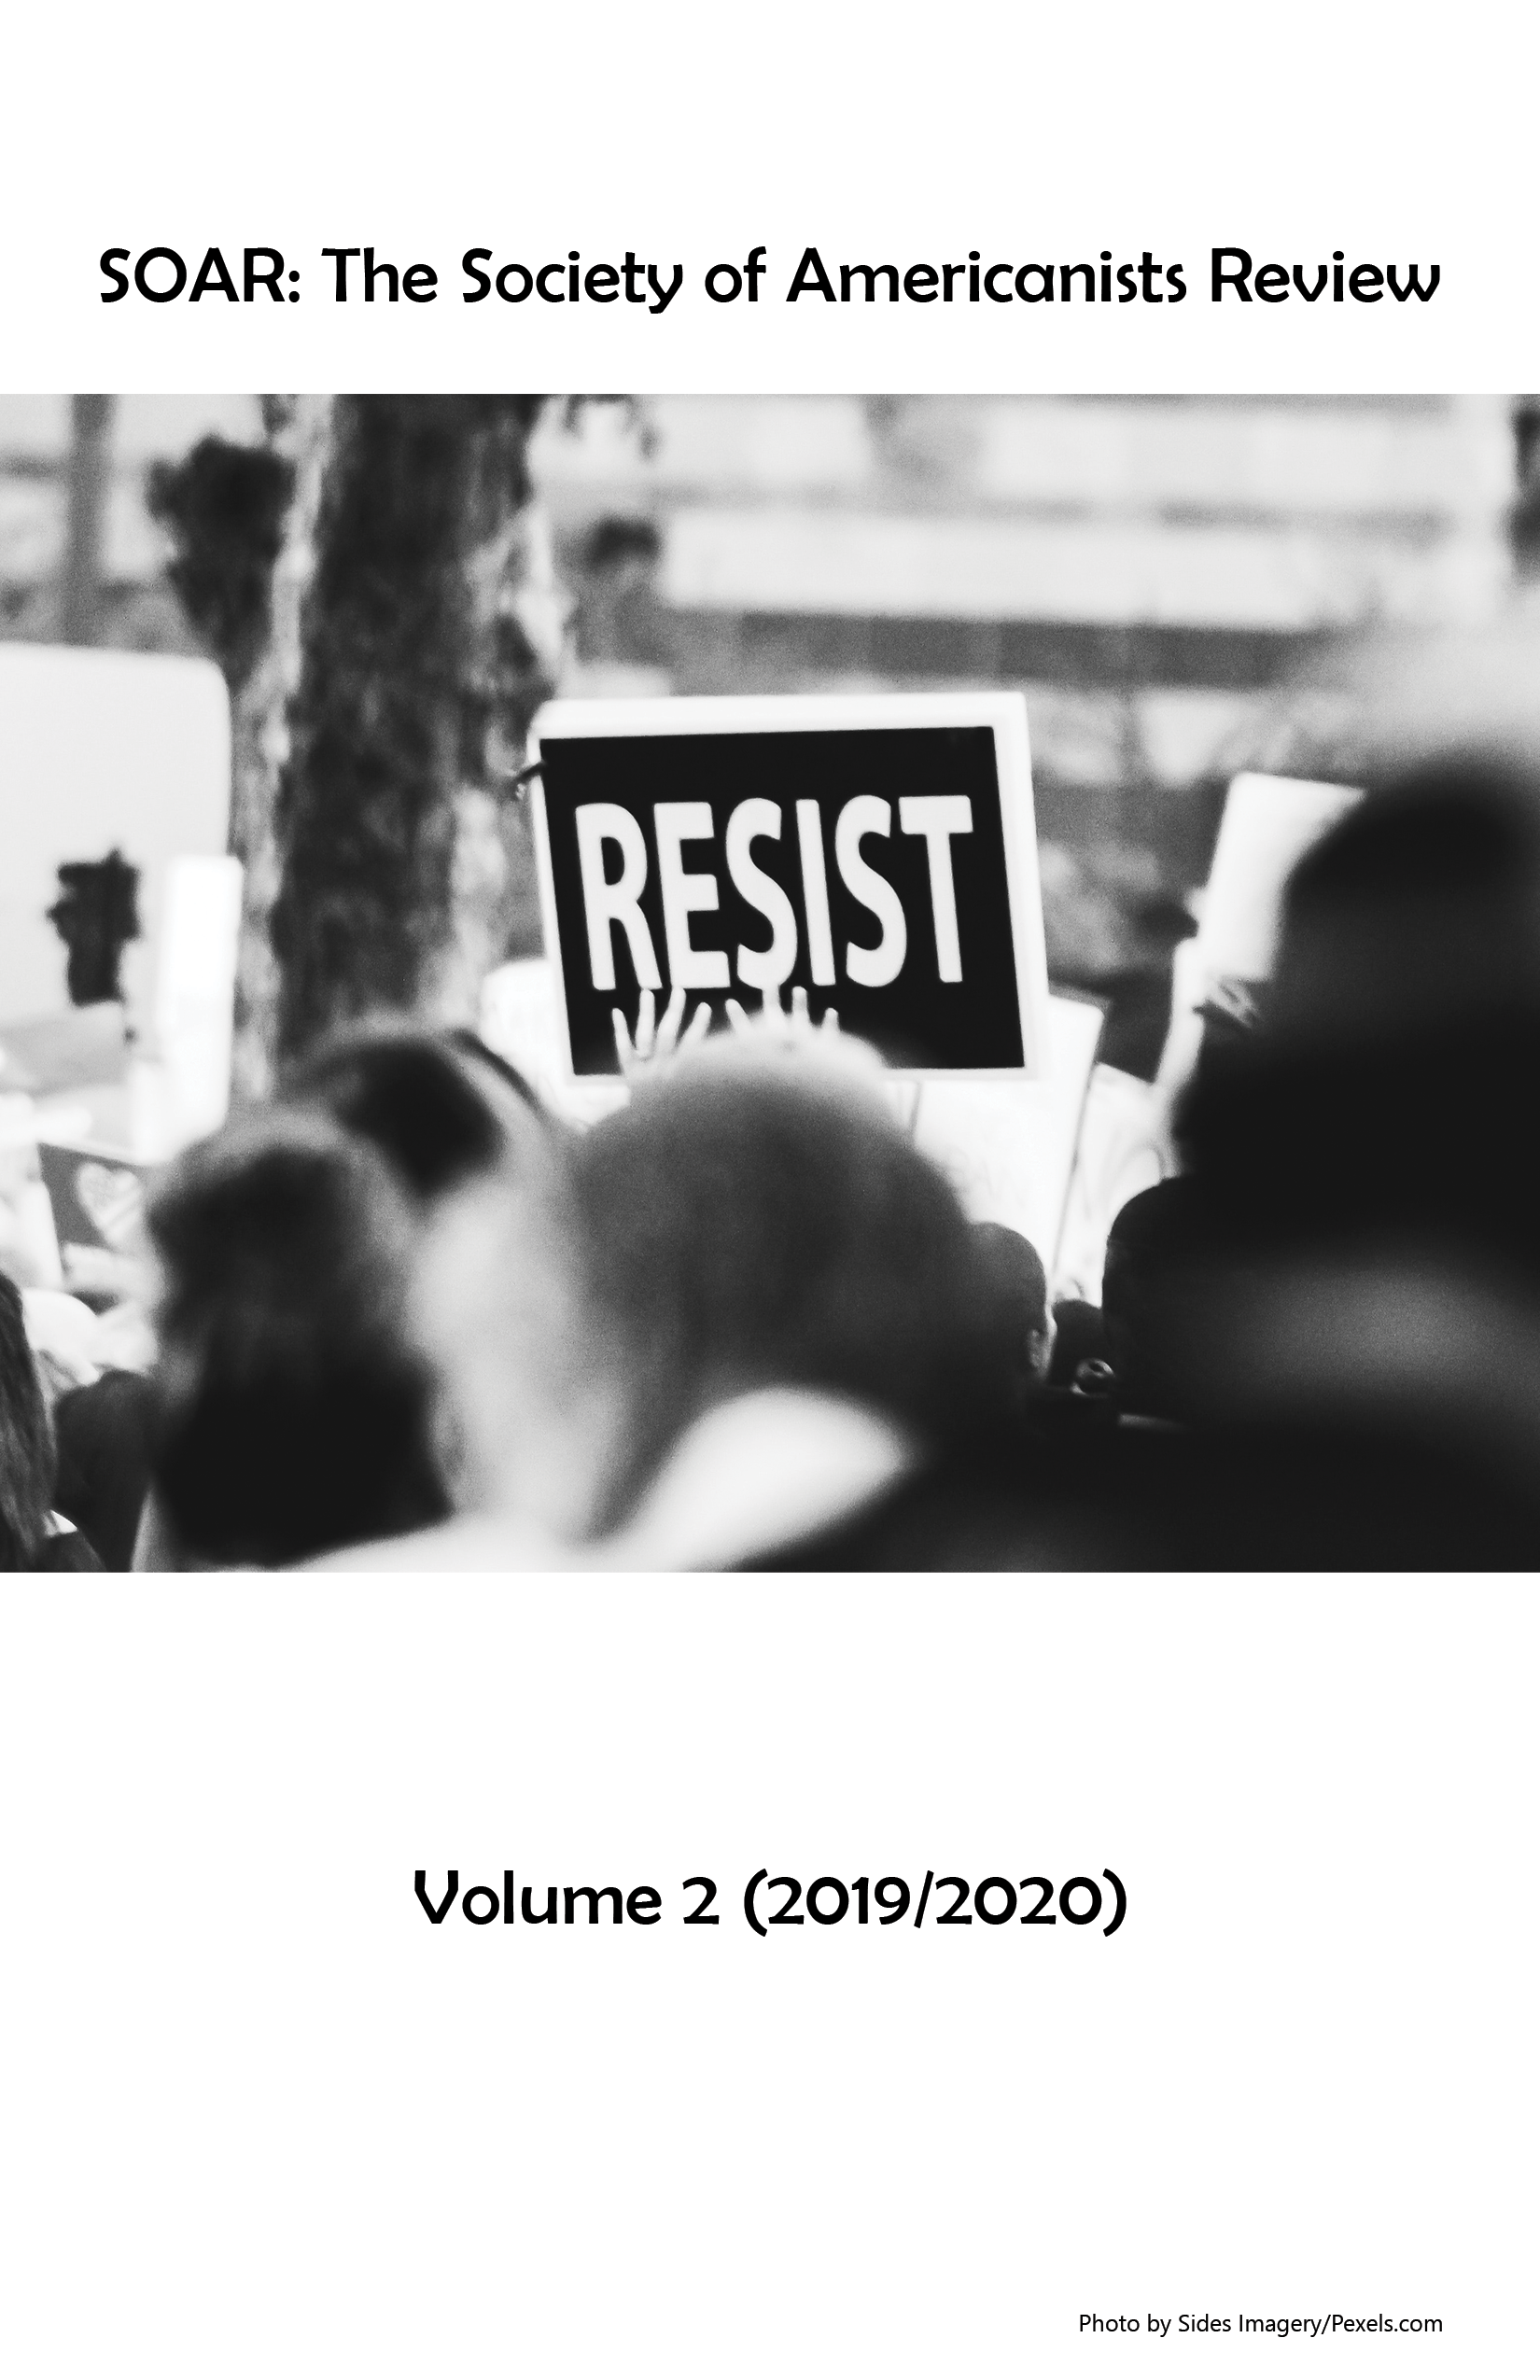 					View Vol 2 (2019-2020): The Resistance
				